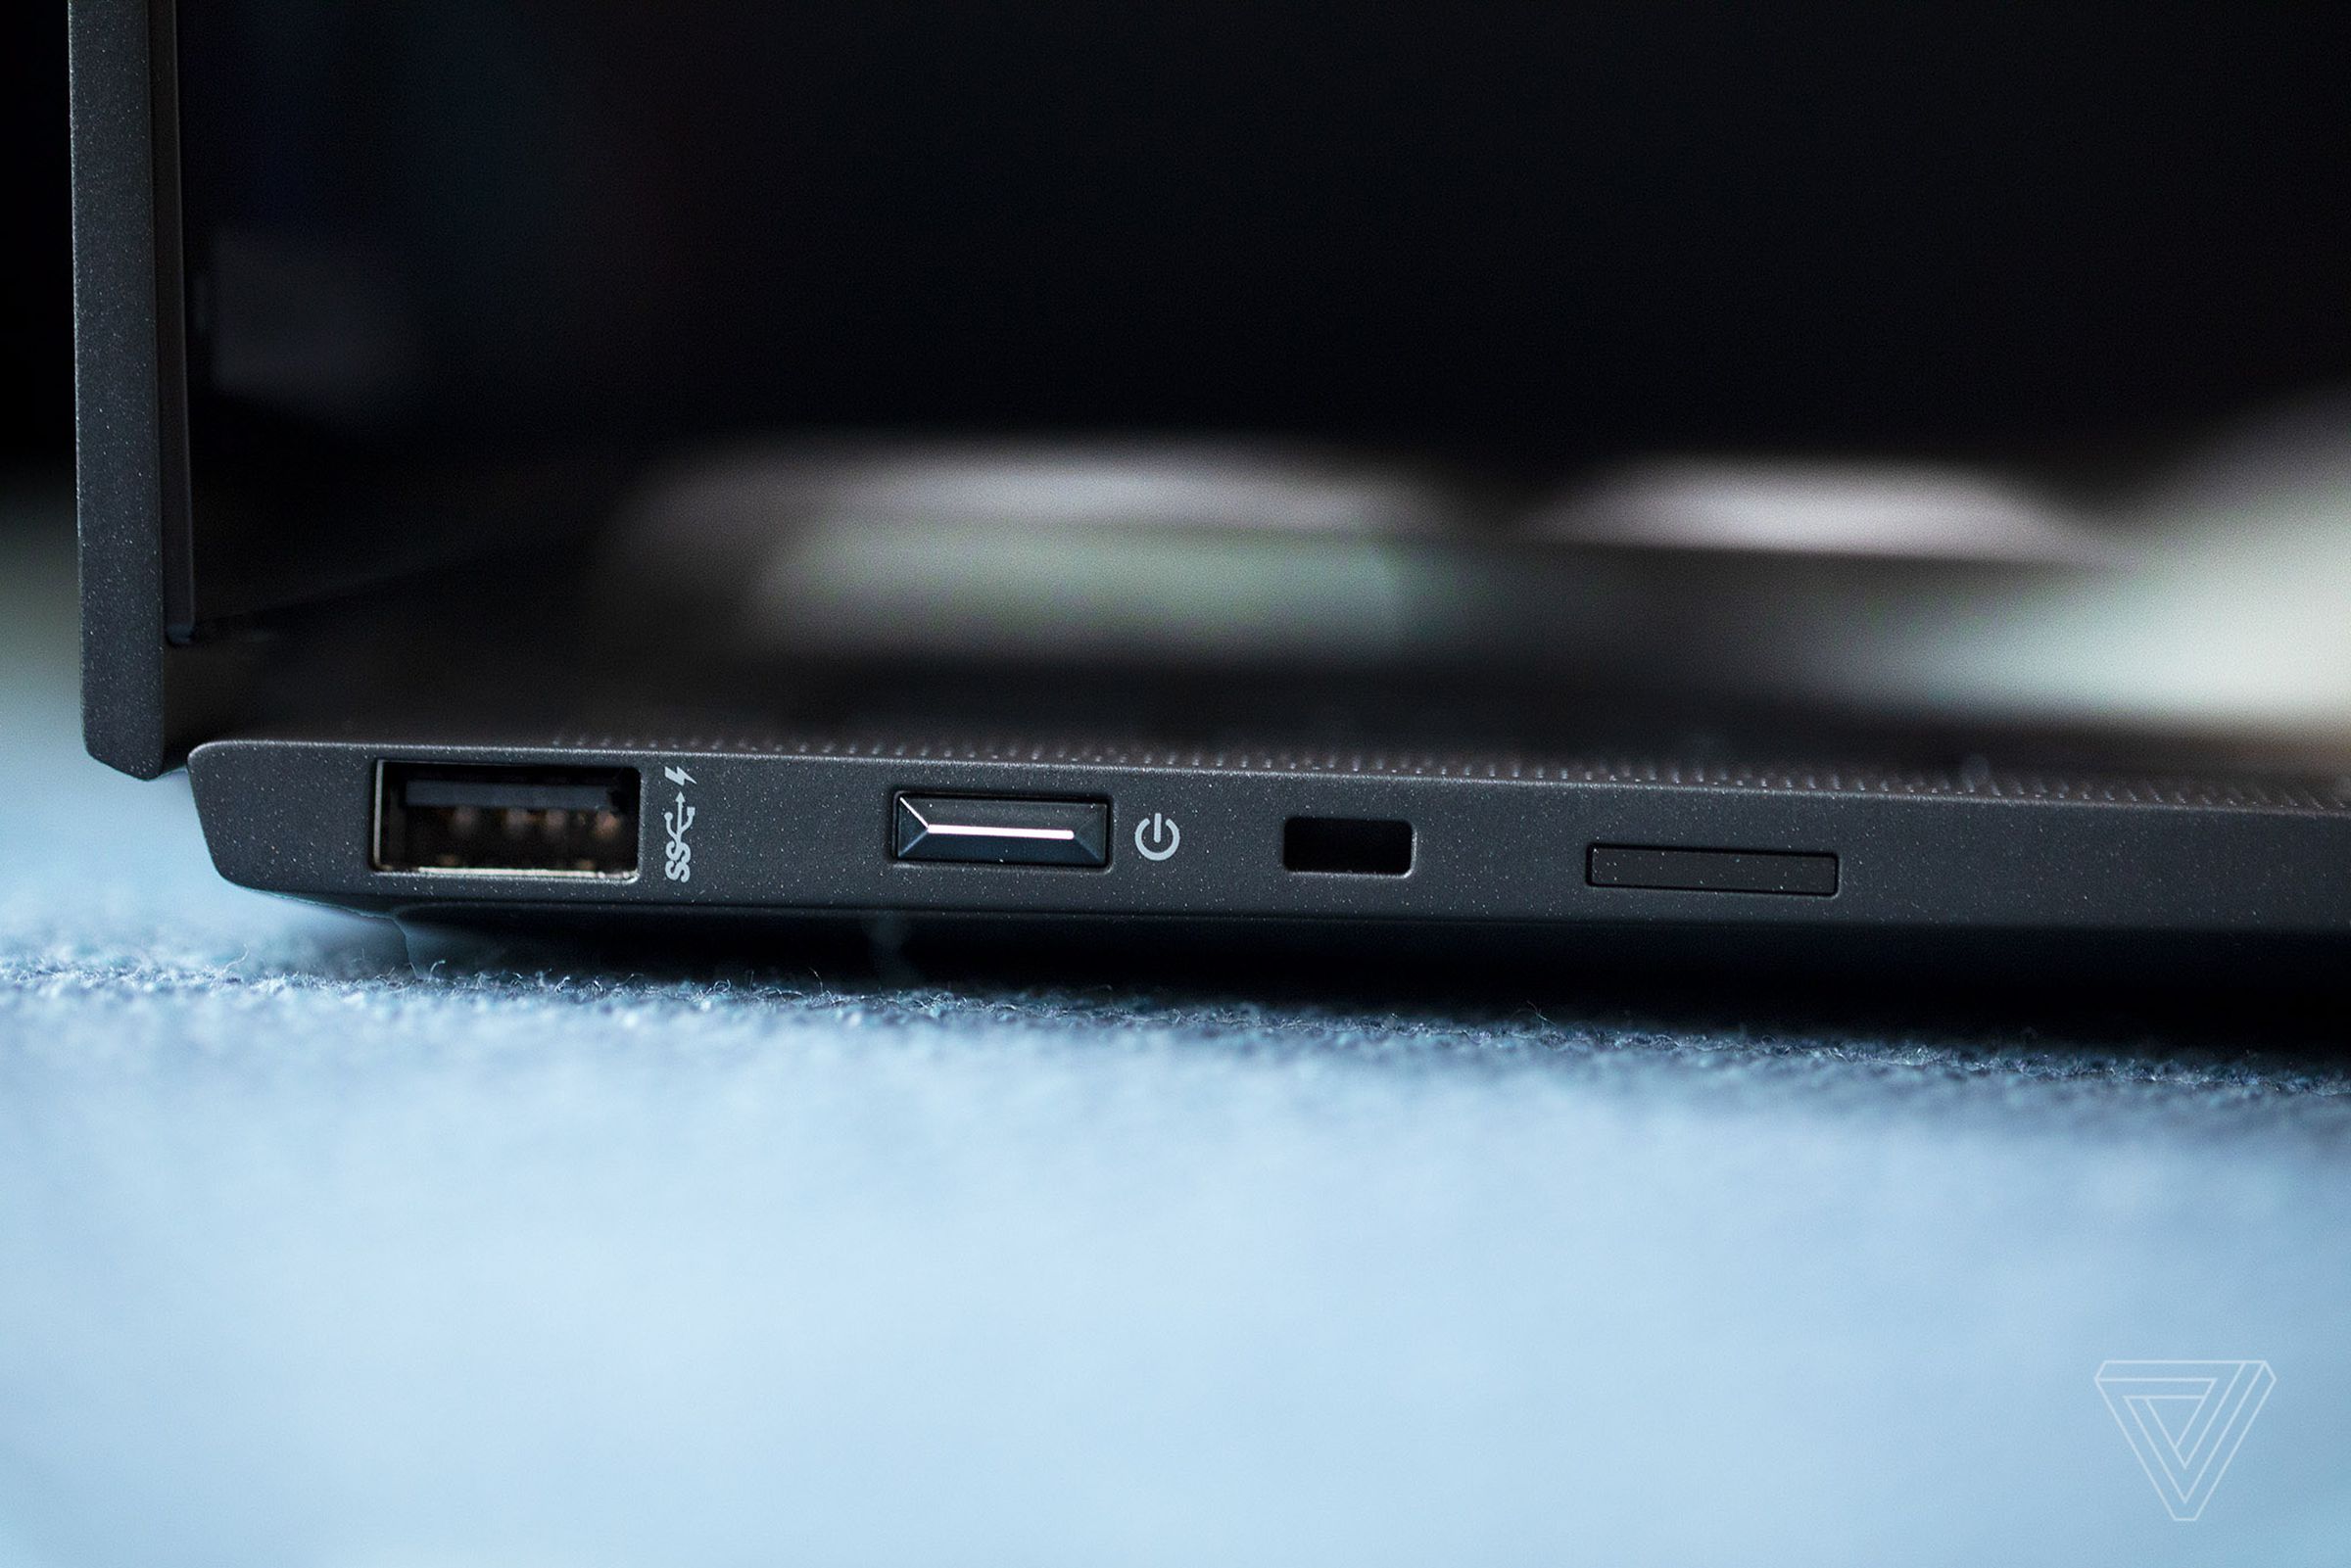 Ports on the right side of the HP Elite Dragonfly Max.